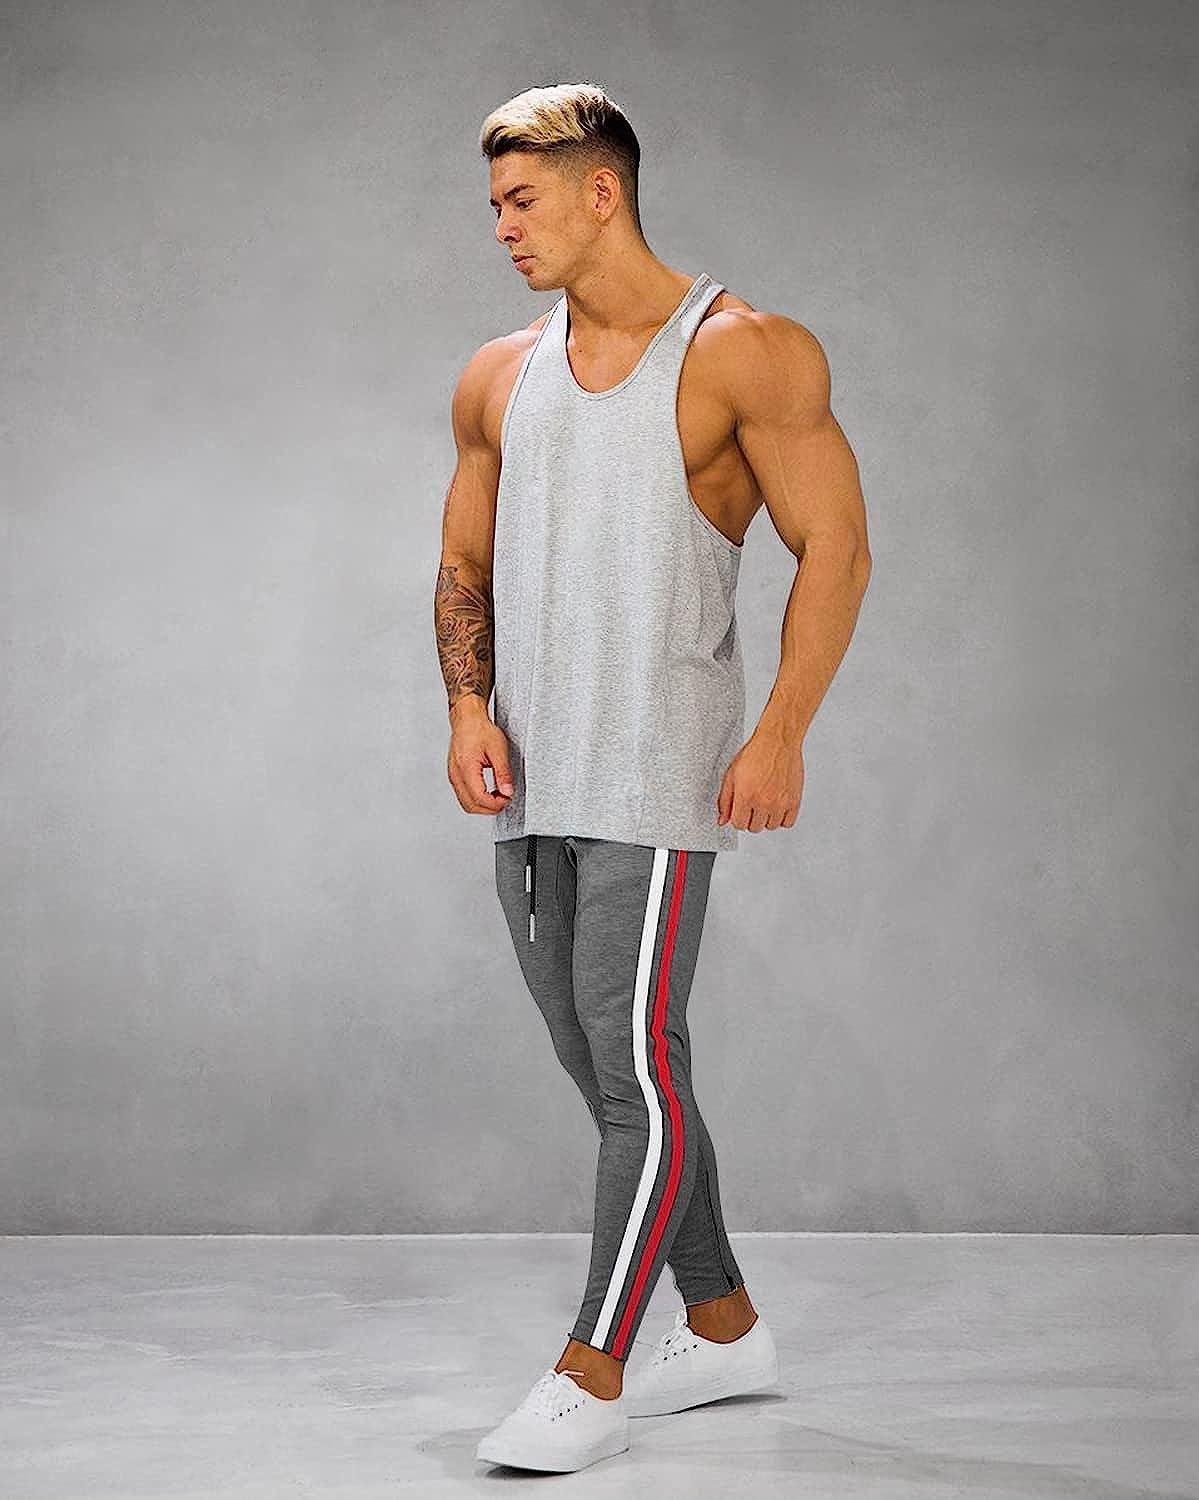 Men's Joggers, South Africa